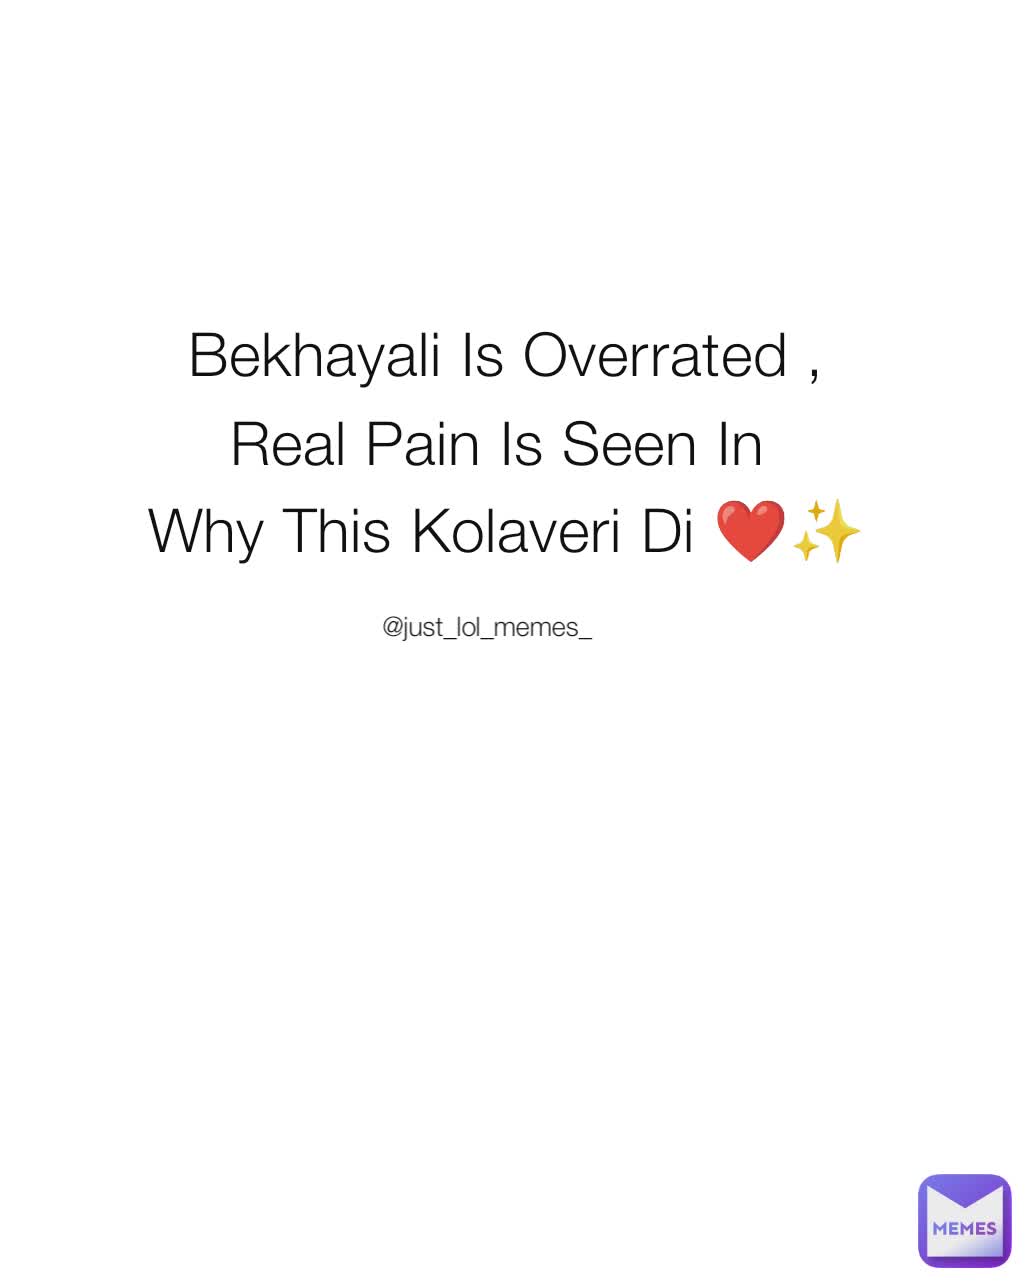 @just_lol_memes_ Bekhayali Is Overrated ,
Real Pain Is Seen In 
Why This Kolaveri Di ❤️✨